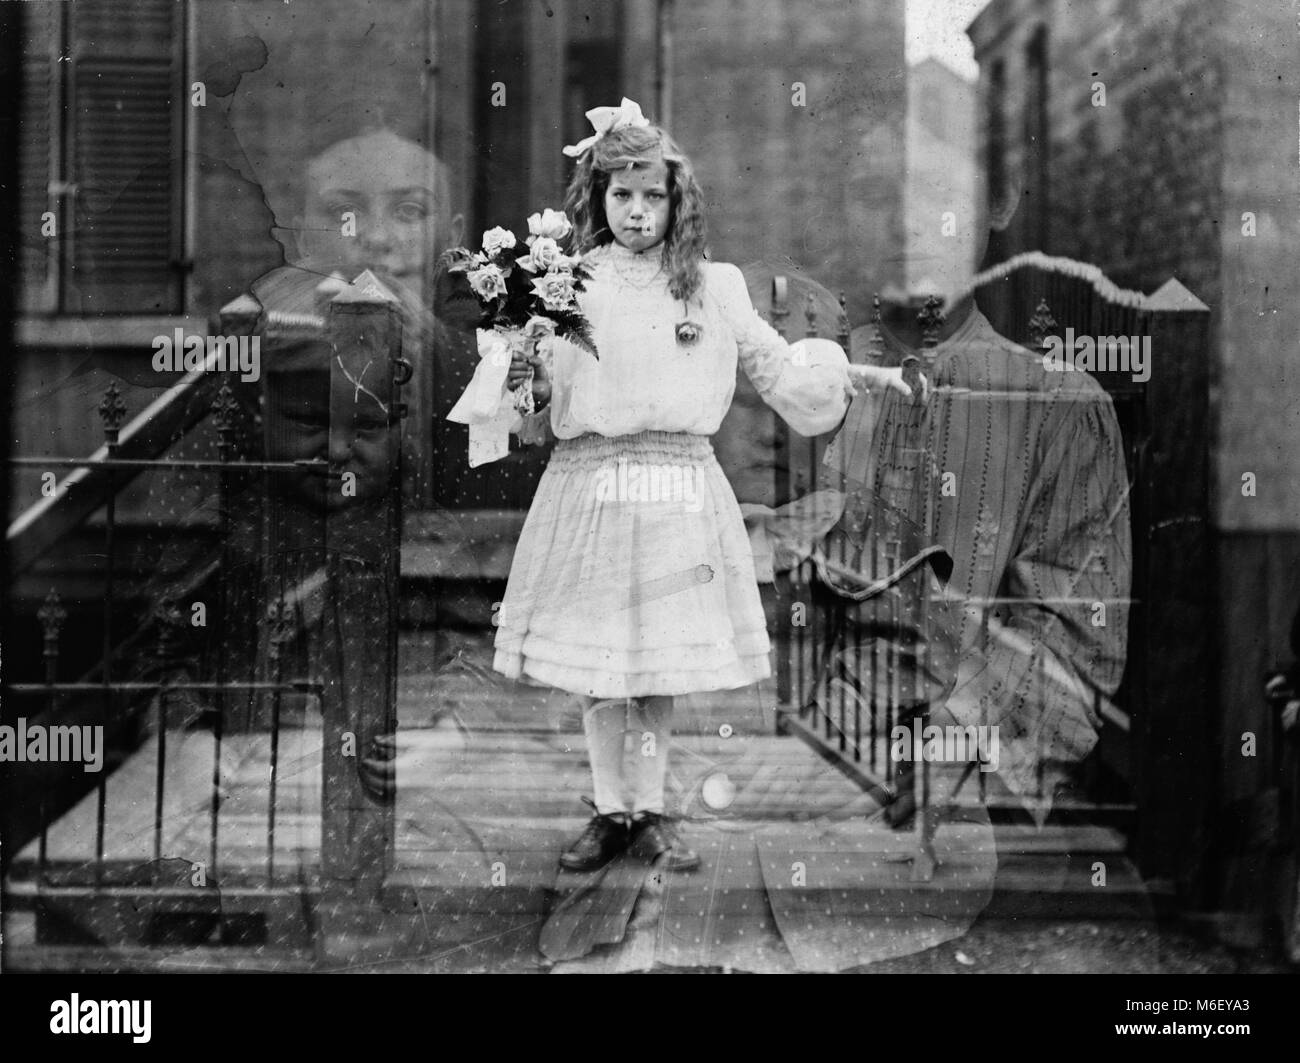 Double exposure spirit photograph showing a girl holding a flower bouquet surrounded by four ghostly figures, Chicago, IL, 1905. Stock Photo